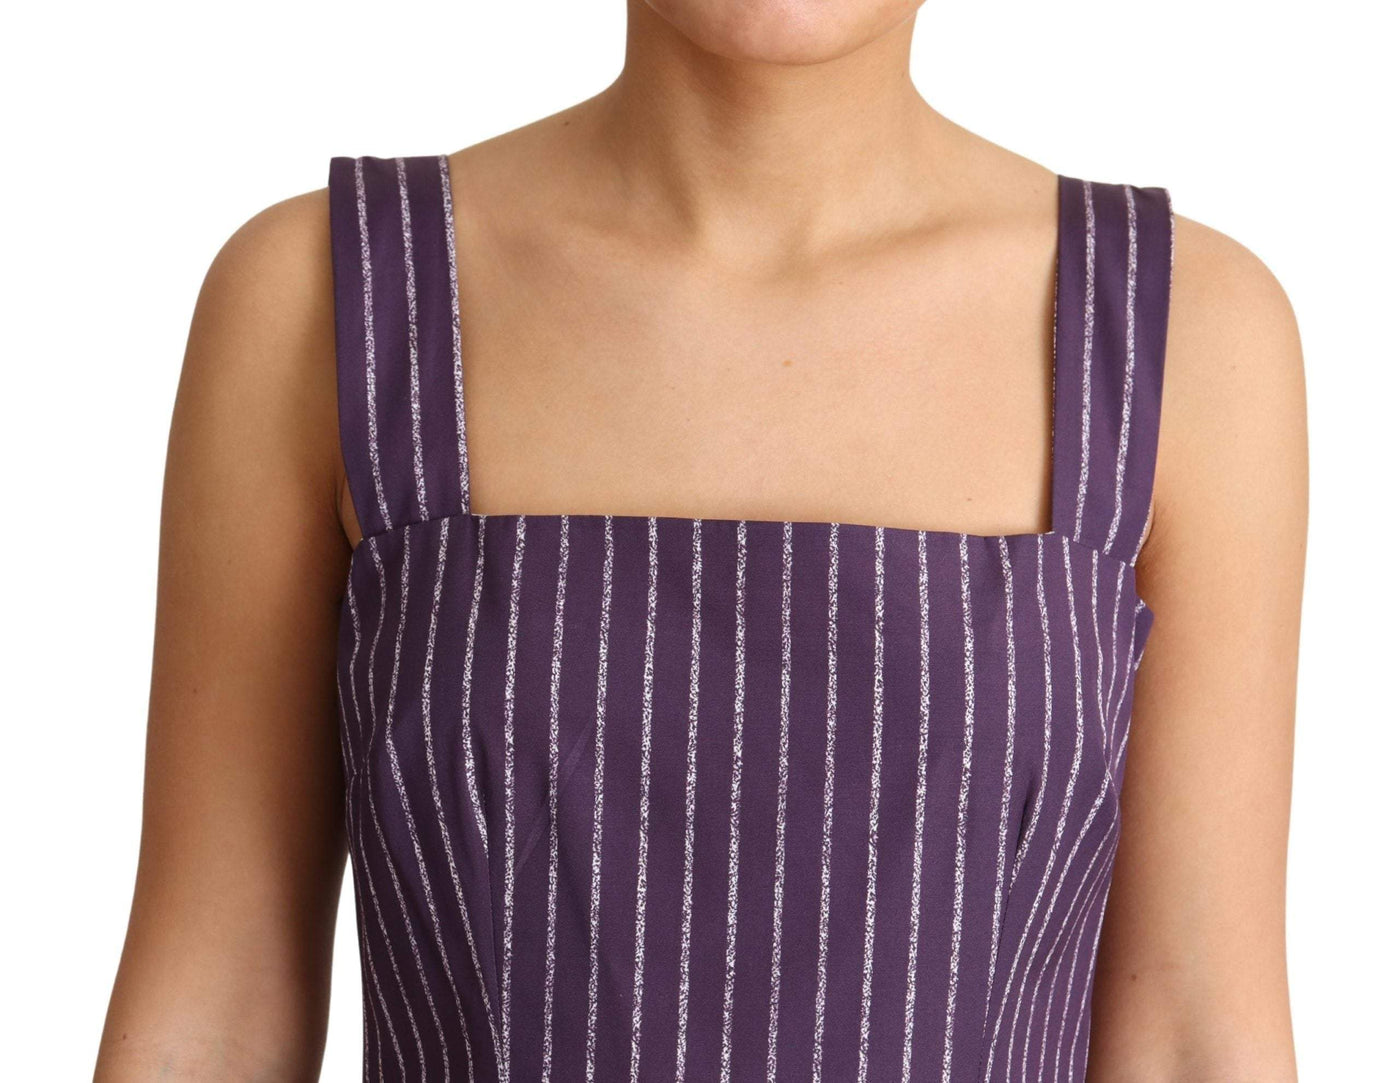 Dolce & Gabbana Purple Striped Cotton A-Line Stretch Dress #women, Dolce & Gabbana, Dresses - Women - Clothing, feed-agegroup-adult, feed-color-Purple, feed-gender-female, IT42|M, Purple, Women - New Arrivals at SEYMAYKA